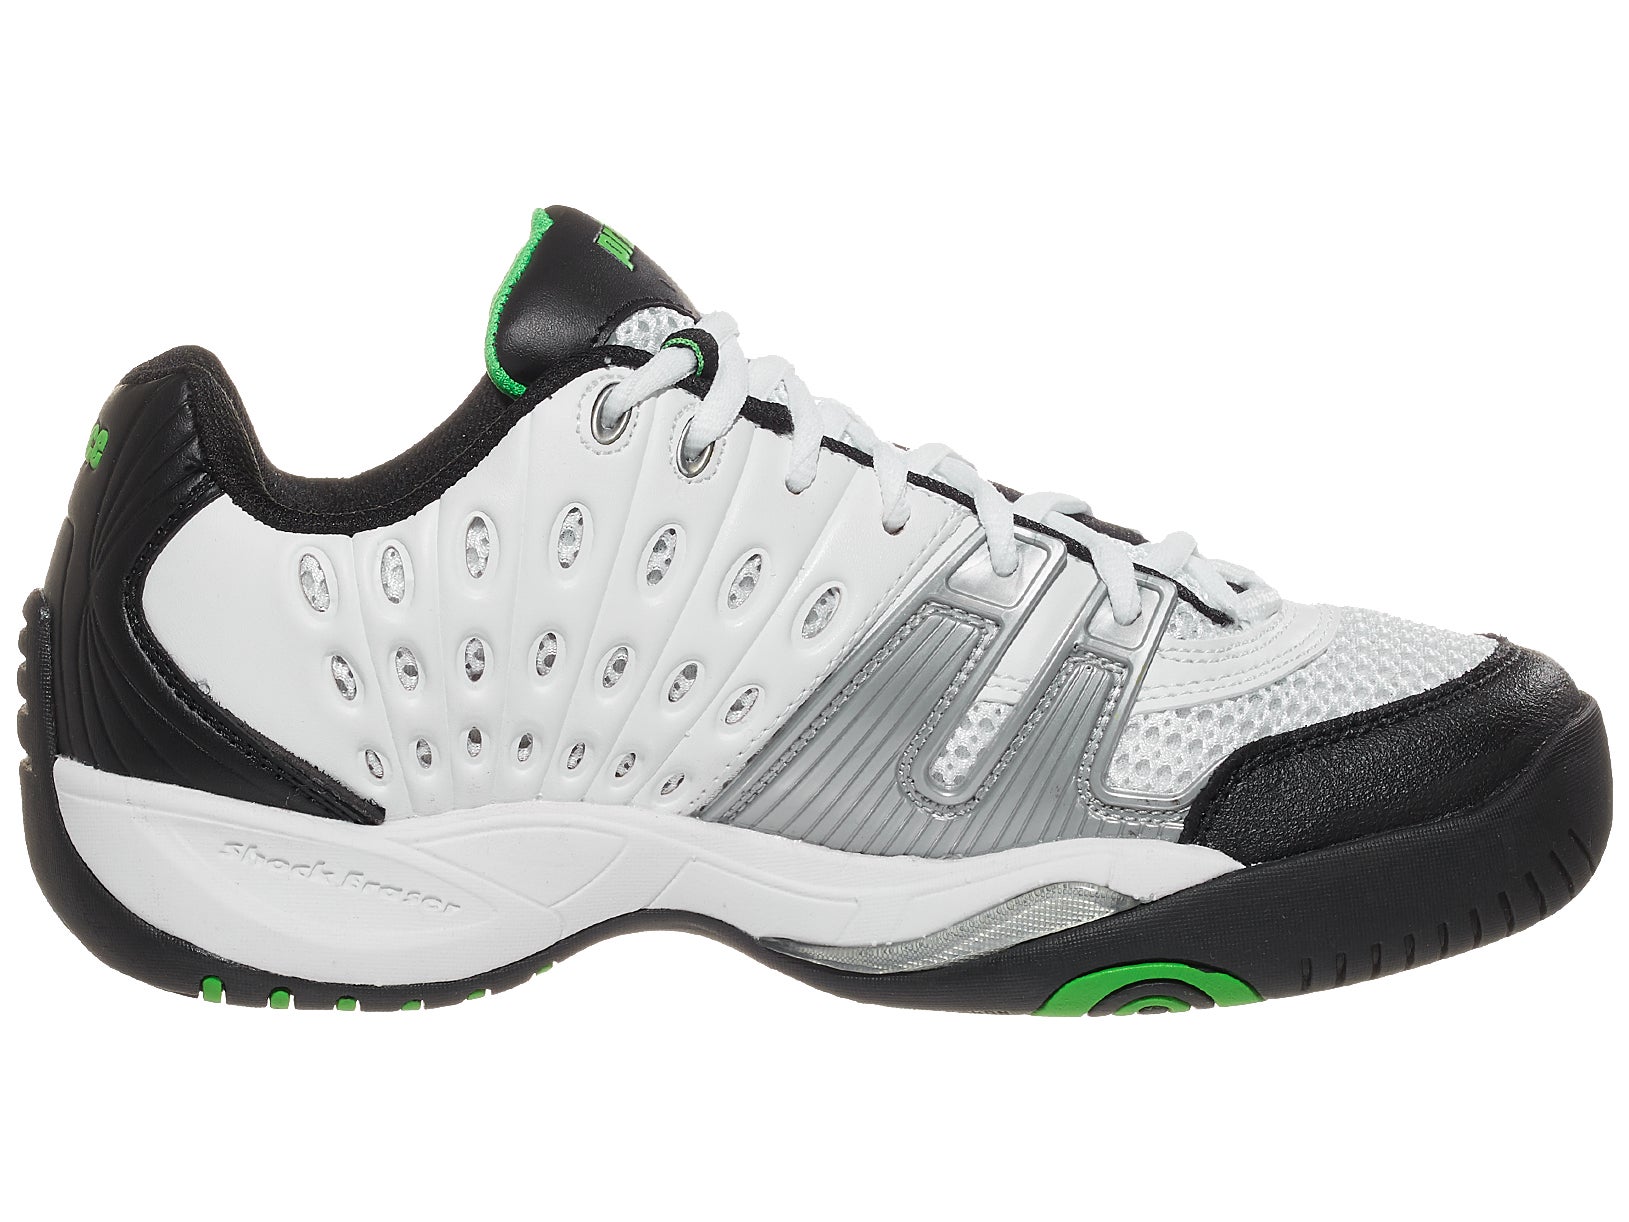 White/Black/Green Authorized Dealer Prince T22 Men's Tennis Shoes Sneakers 